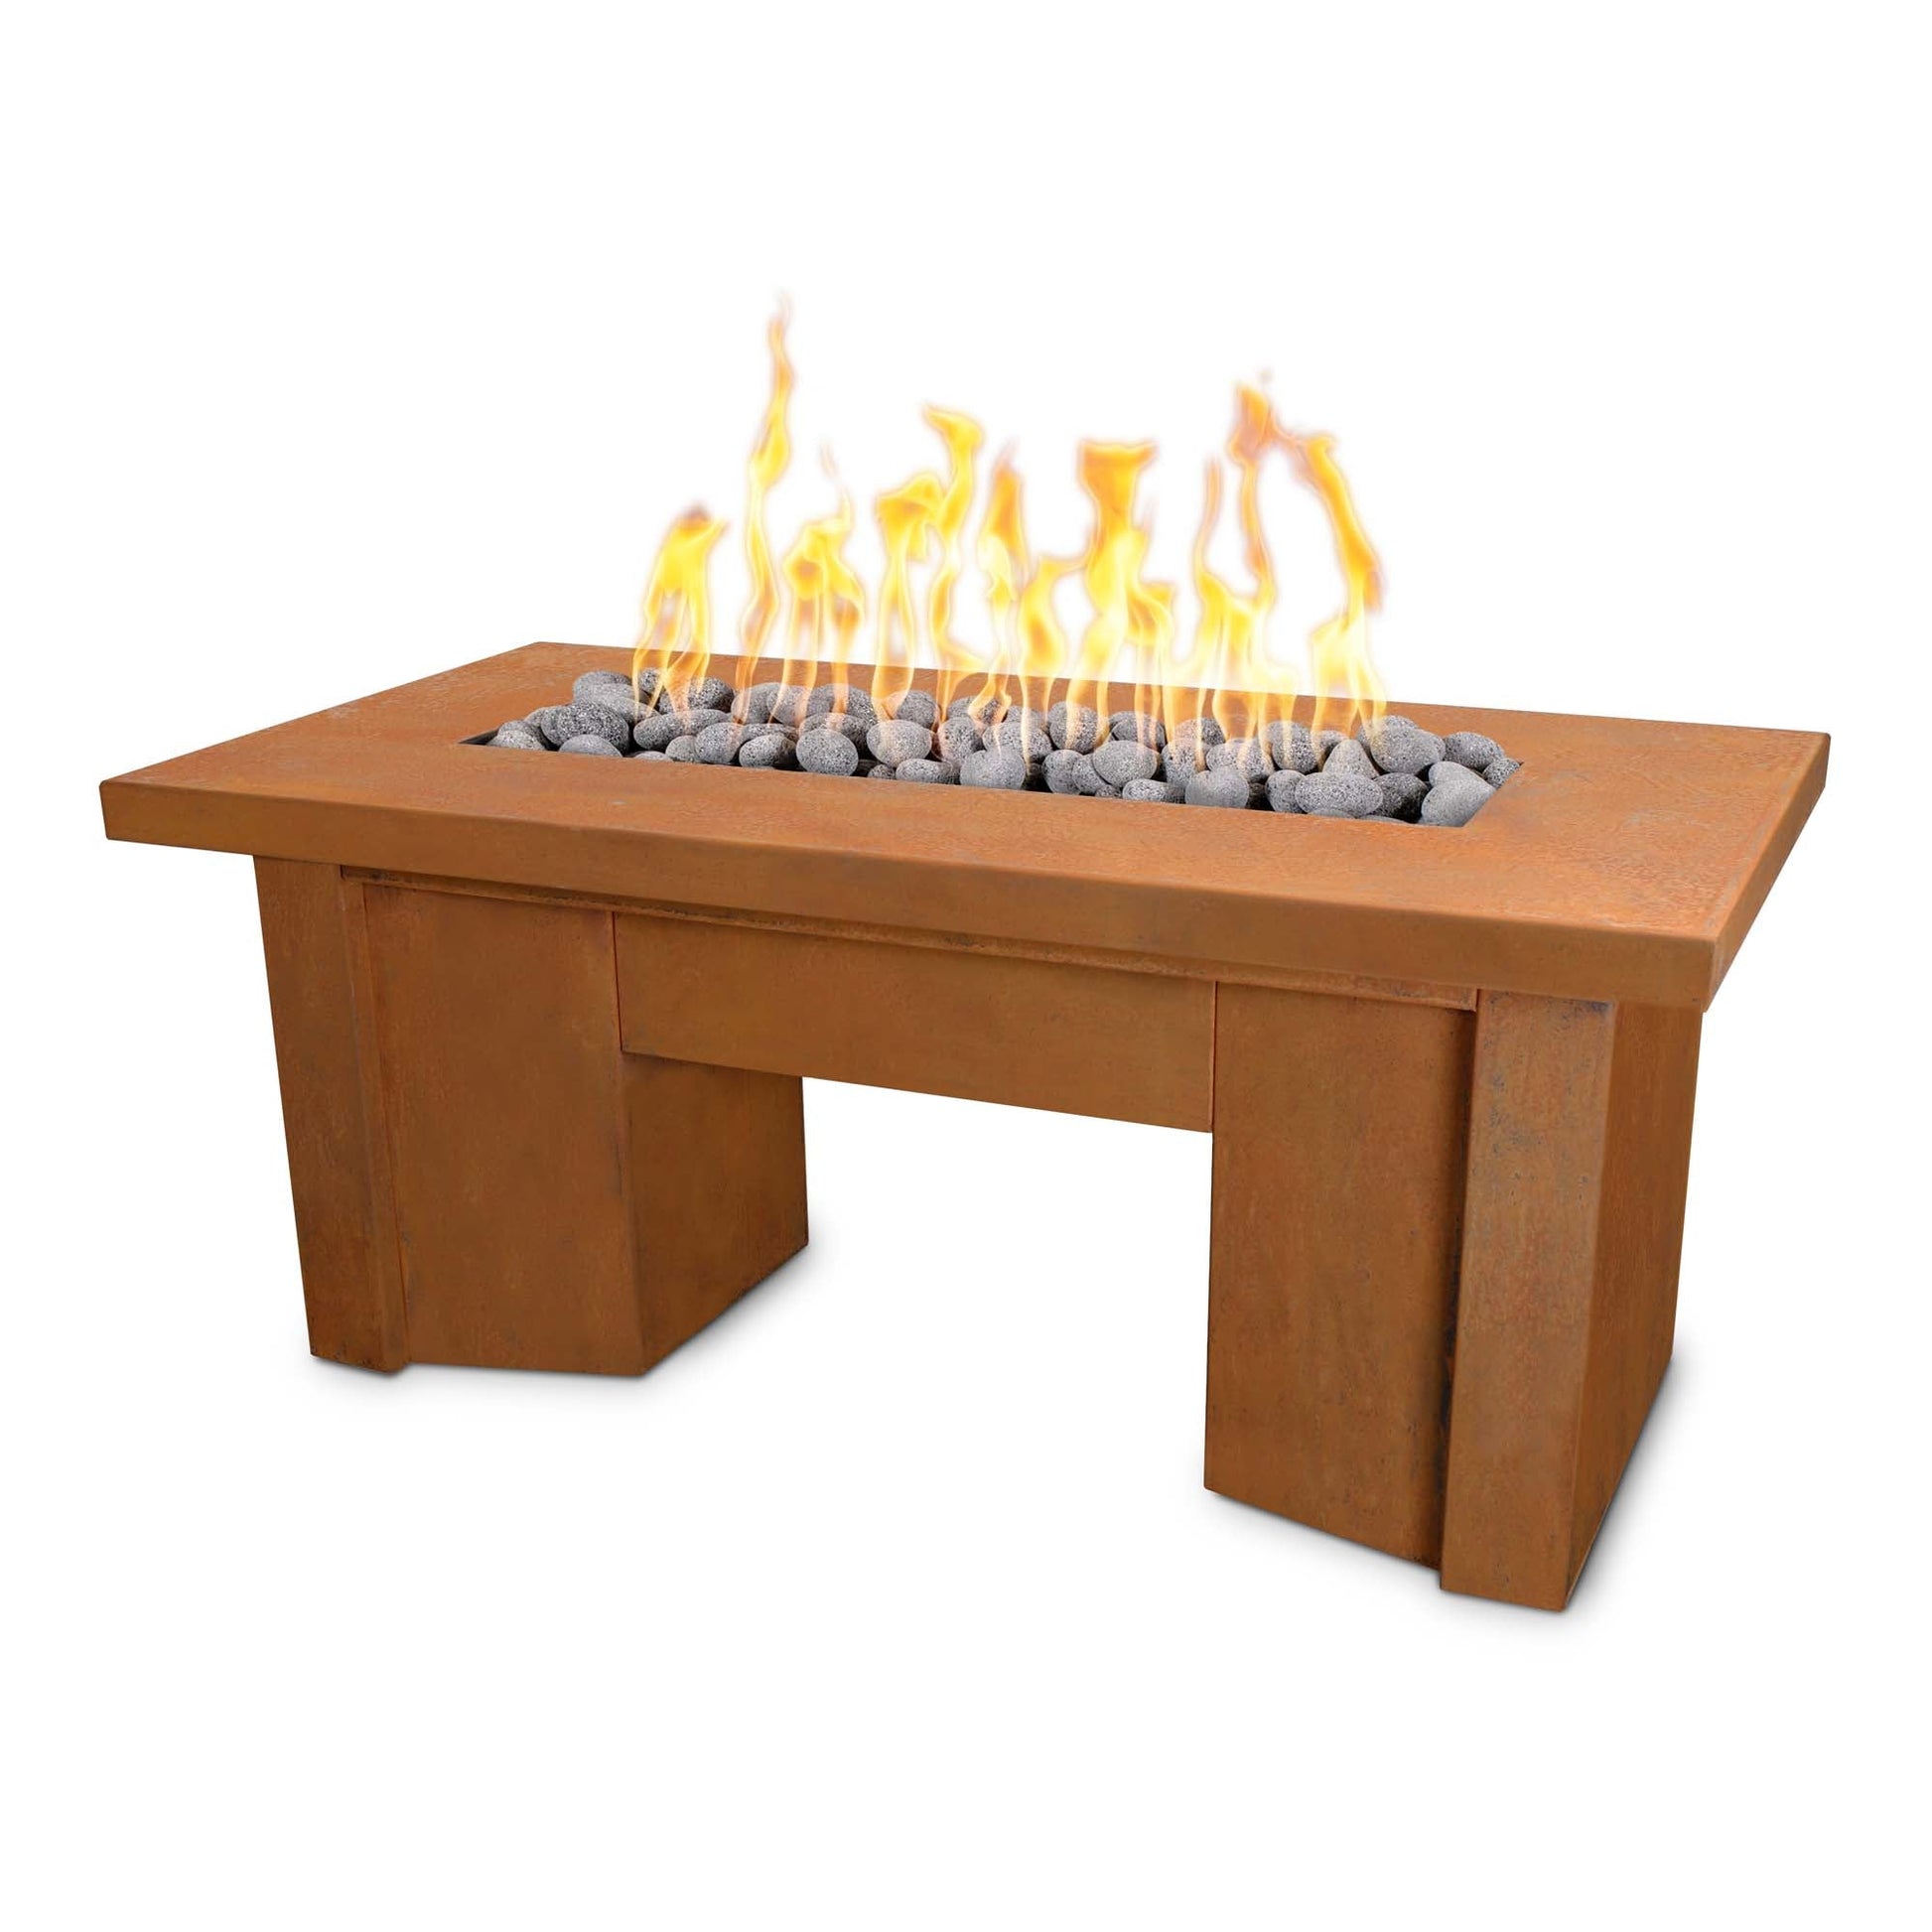 The Outdoor Plus Rectangular Alameda 48" Corten Steel Natural Gas Fire Pit with 12V Electronic Ignition